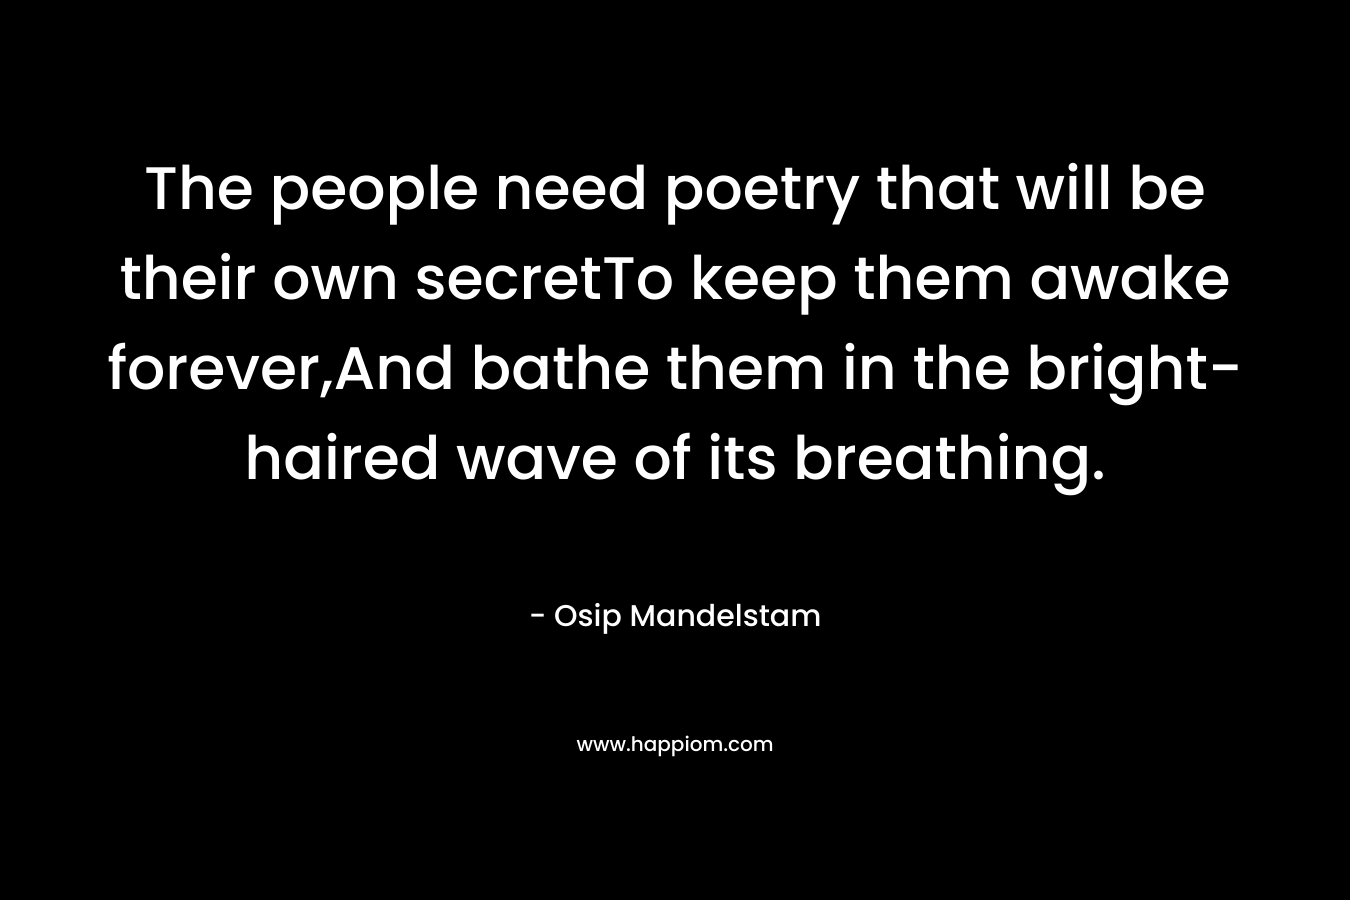 The people need poetry that will be their own secretTo keep them awake forever,And bathe them in the bright-haired wave of its breathing.